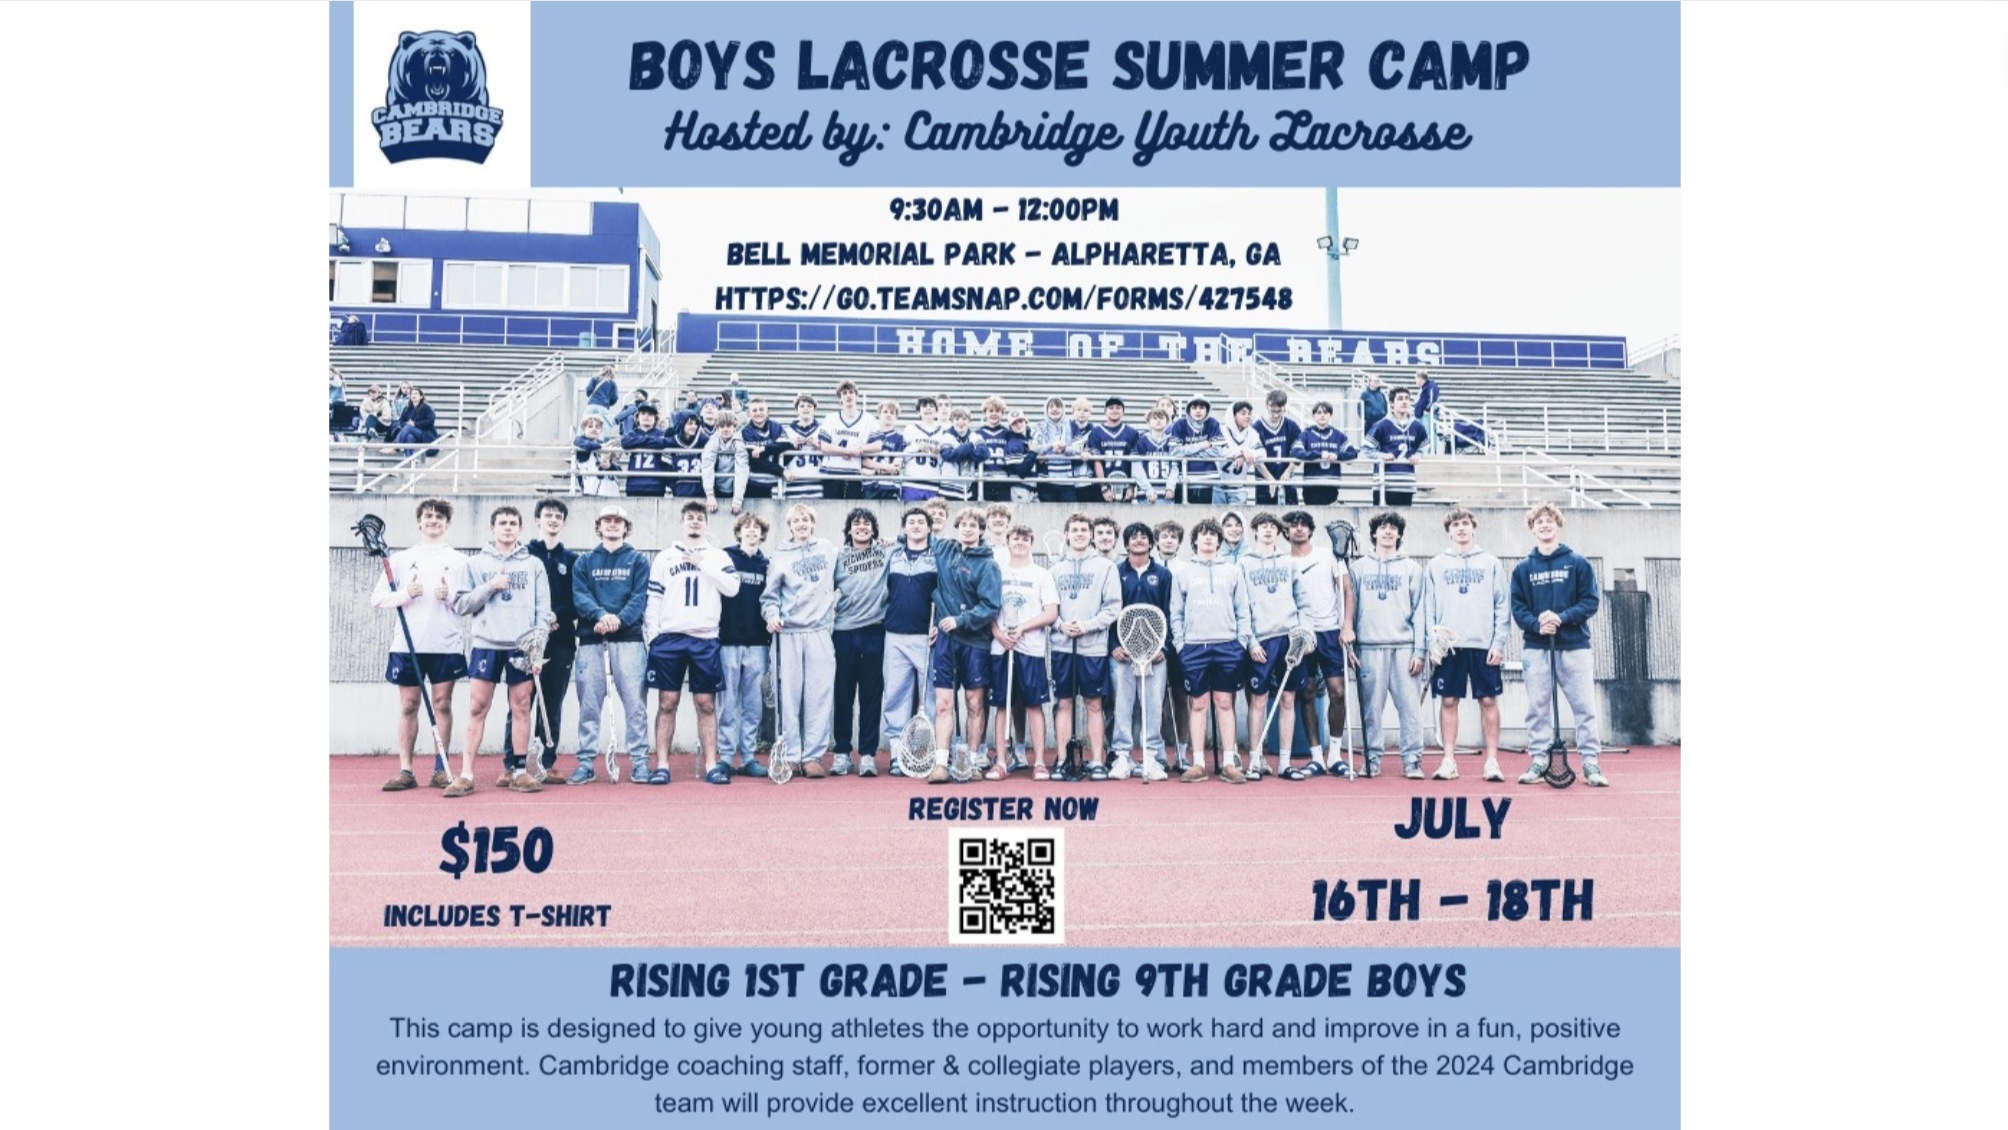 Registration now open for LAX Camp July 16-18